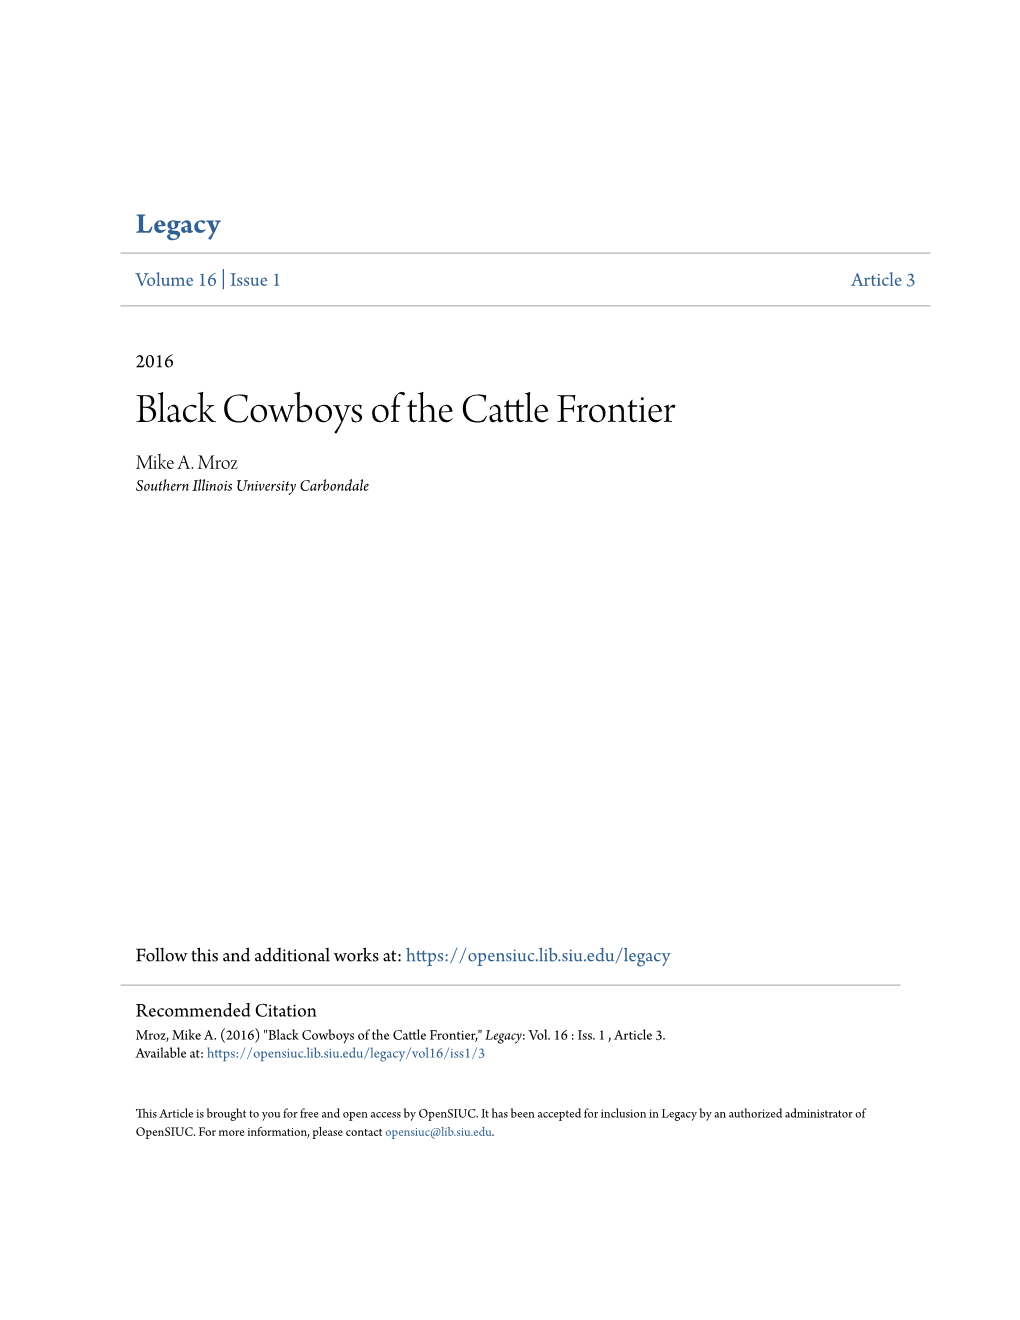 Black Cowboys of the Cattle Frontier